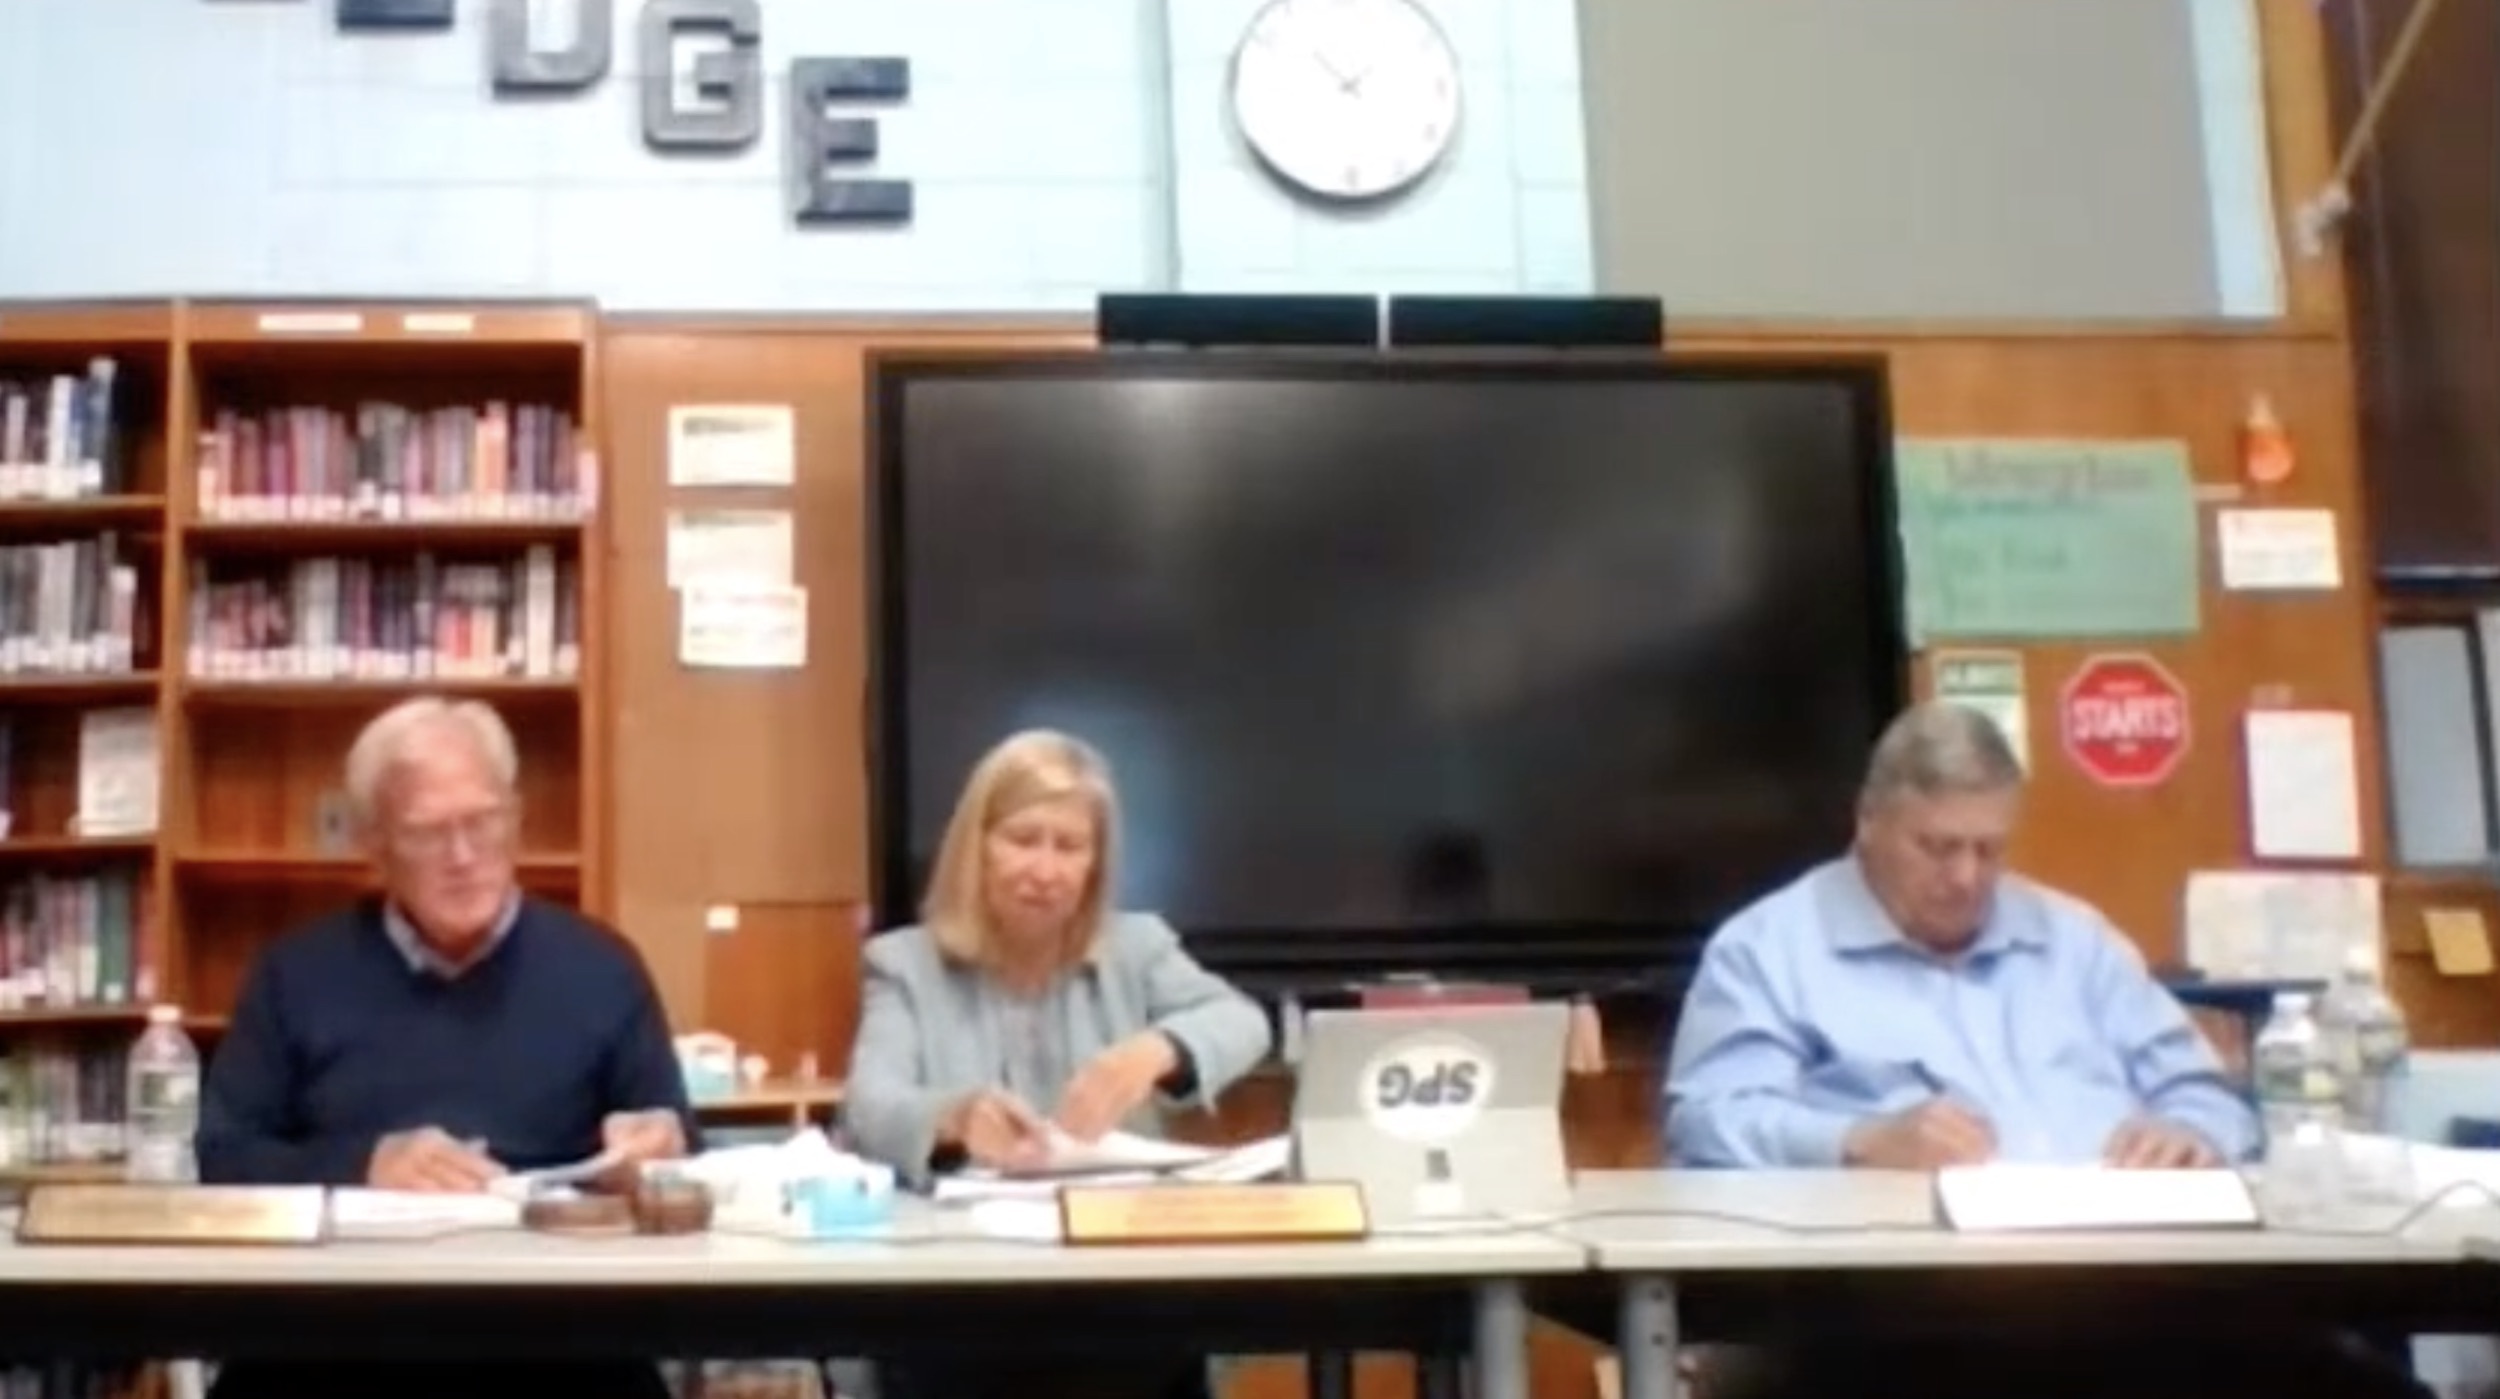 Springs School Board of Education Vice President Tim Frazier, Superintendent Debra Winter and School Business Administrator Michael Henery at the May 24 meeting.